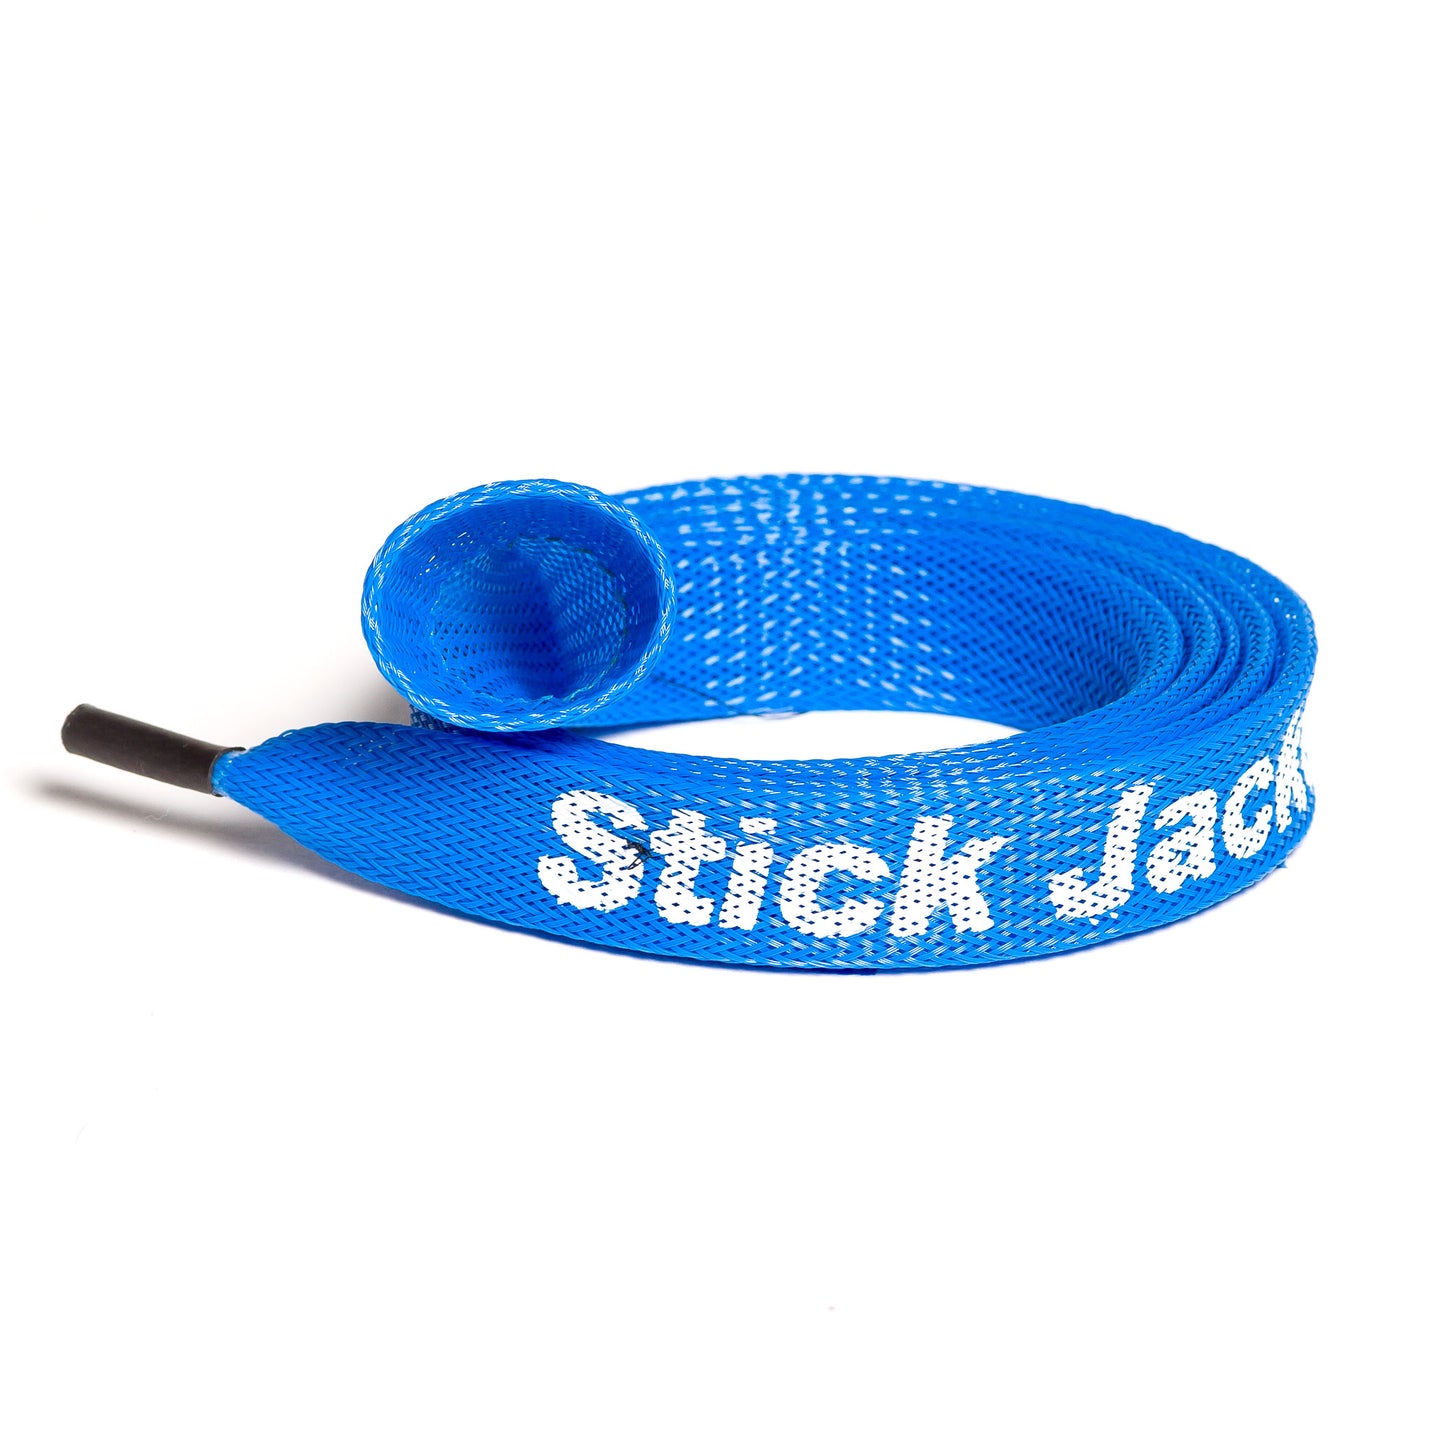 Blue Casting Stick Jacket® Fishing Rod Cover For Rods up to 7-1/2'